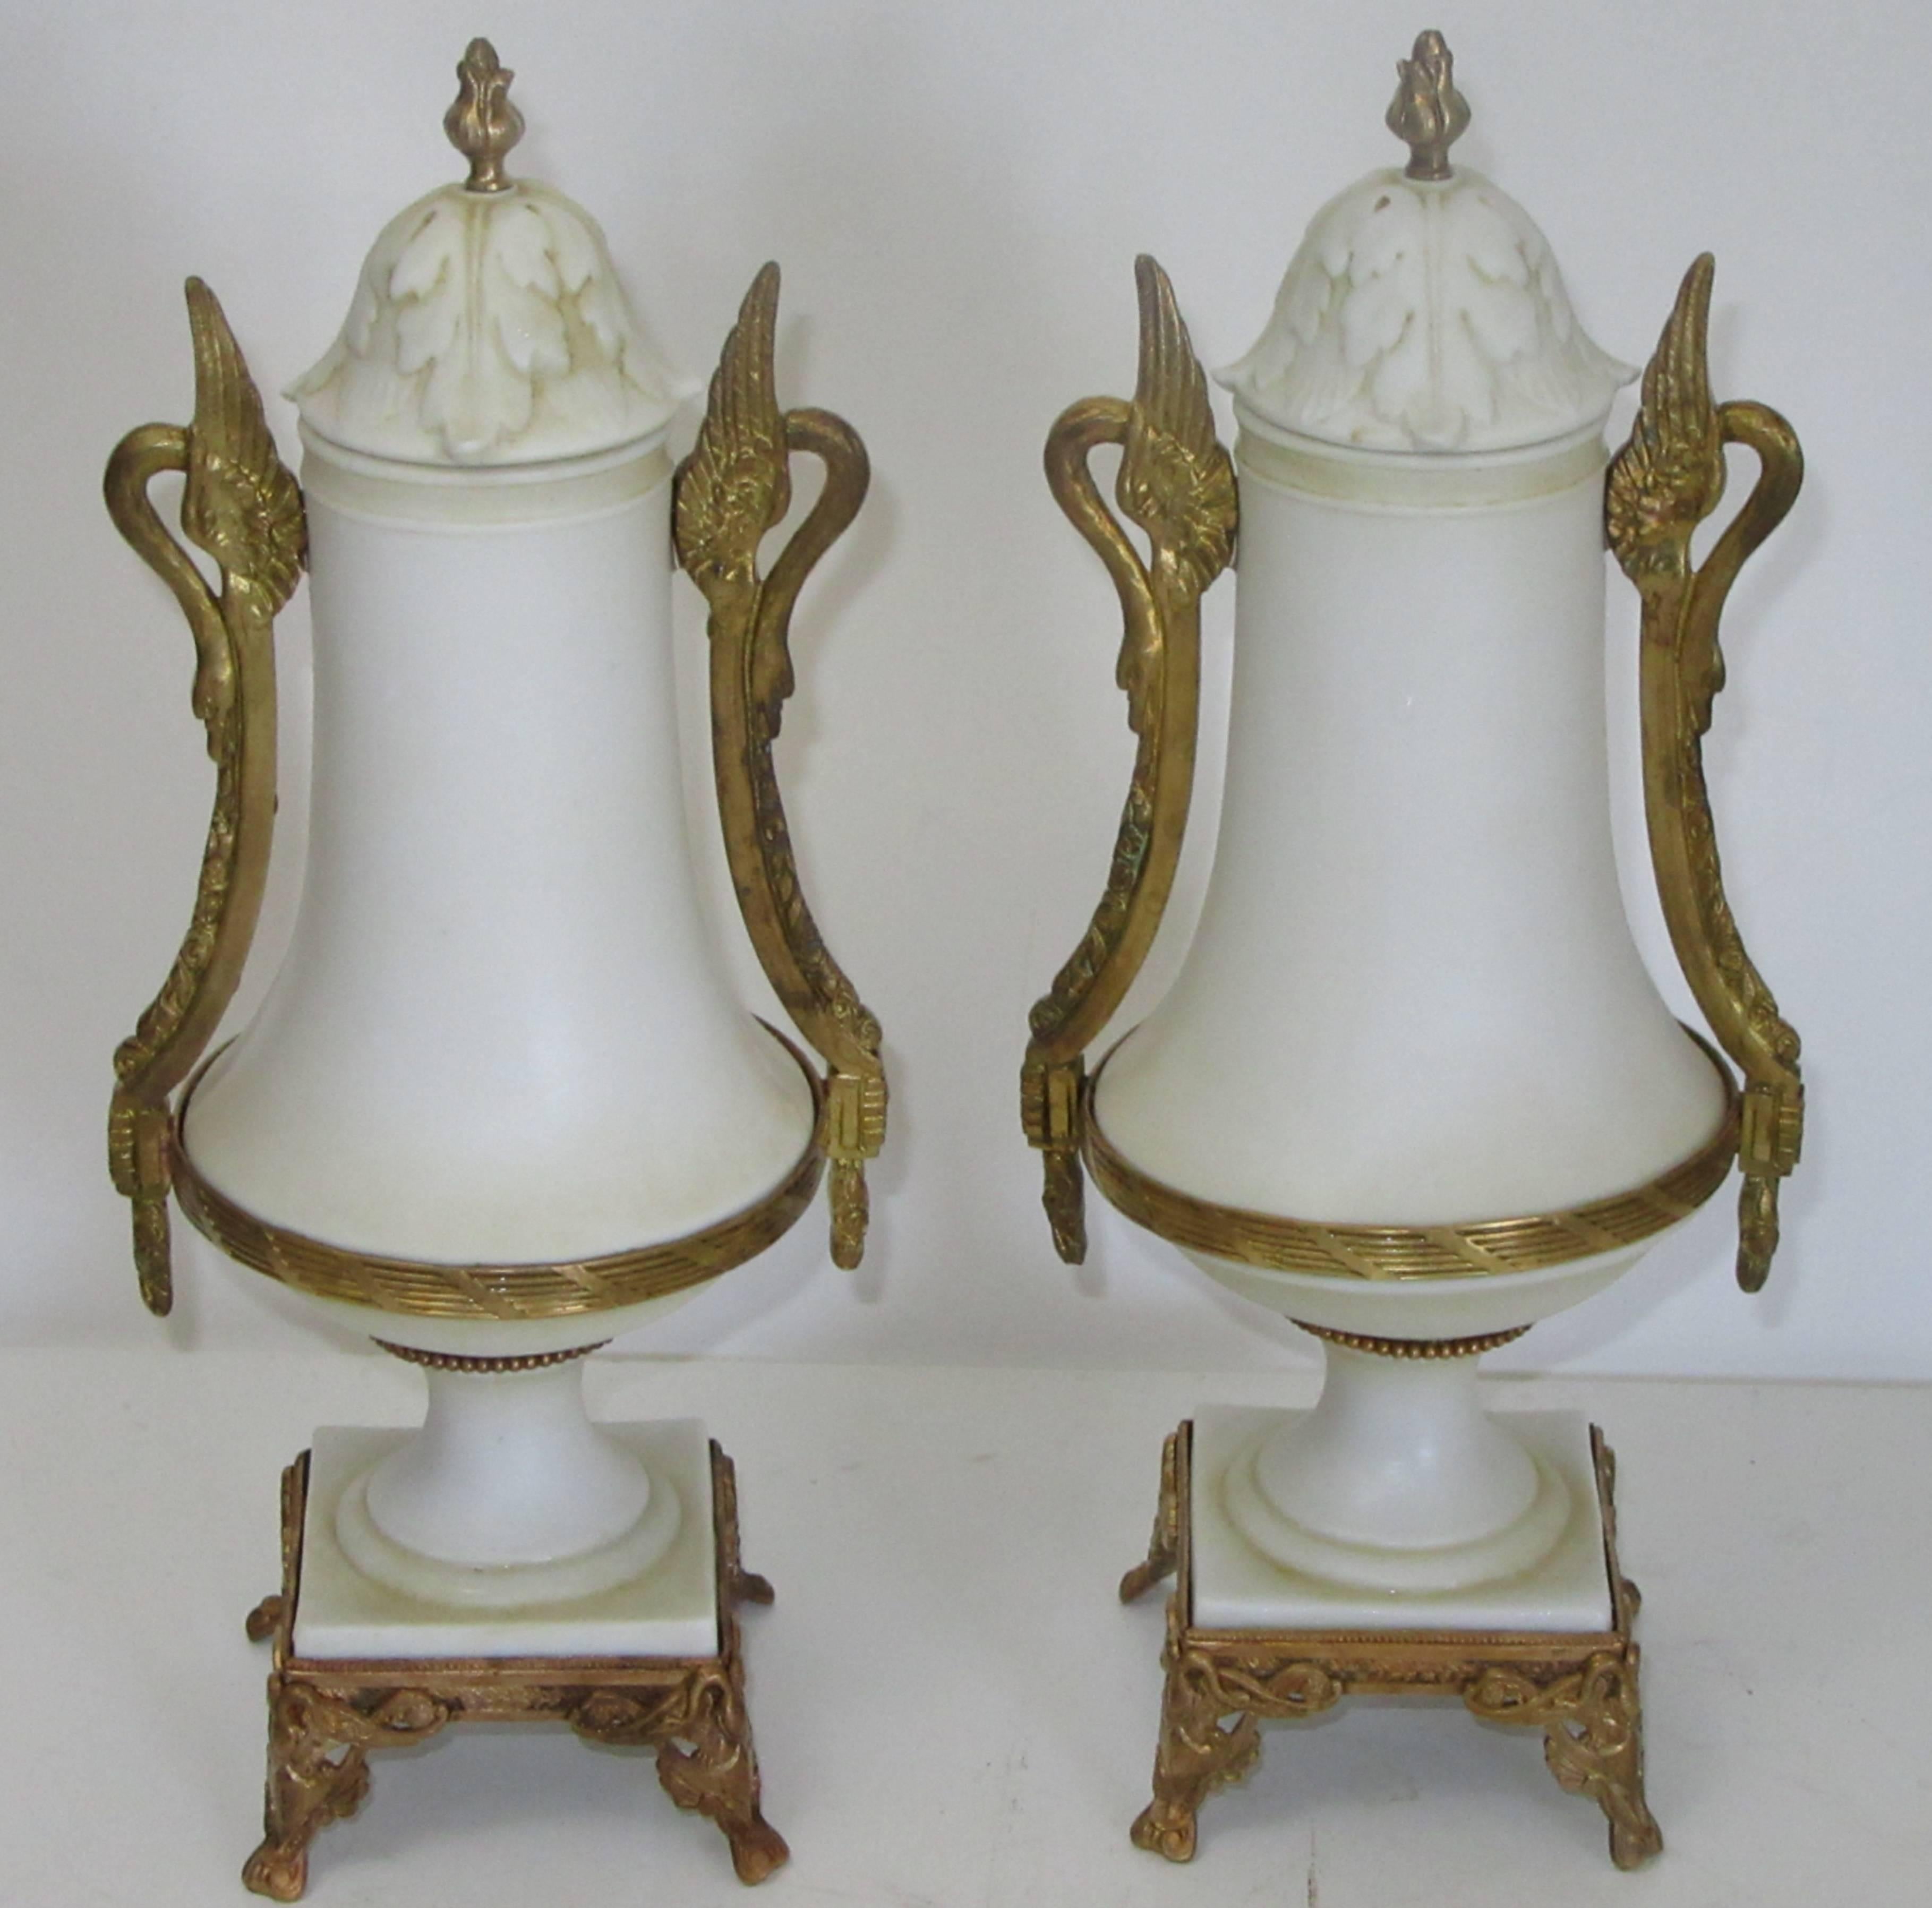 A pair of bisque porcelain lidded urns mounted with bronze doré by A&E Muller.